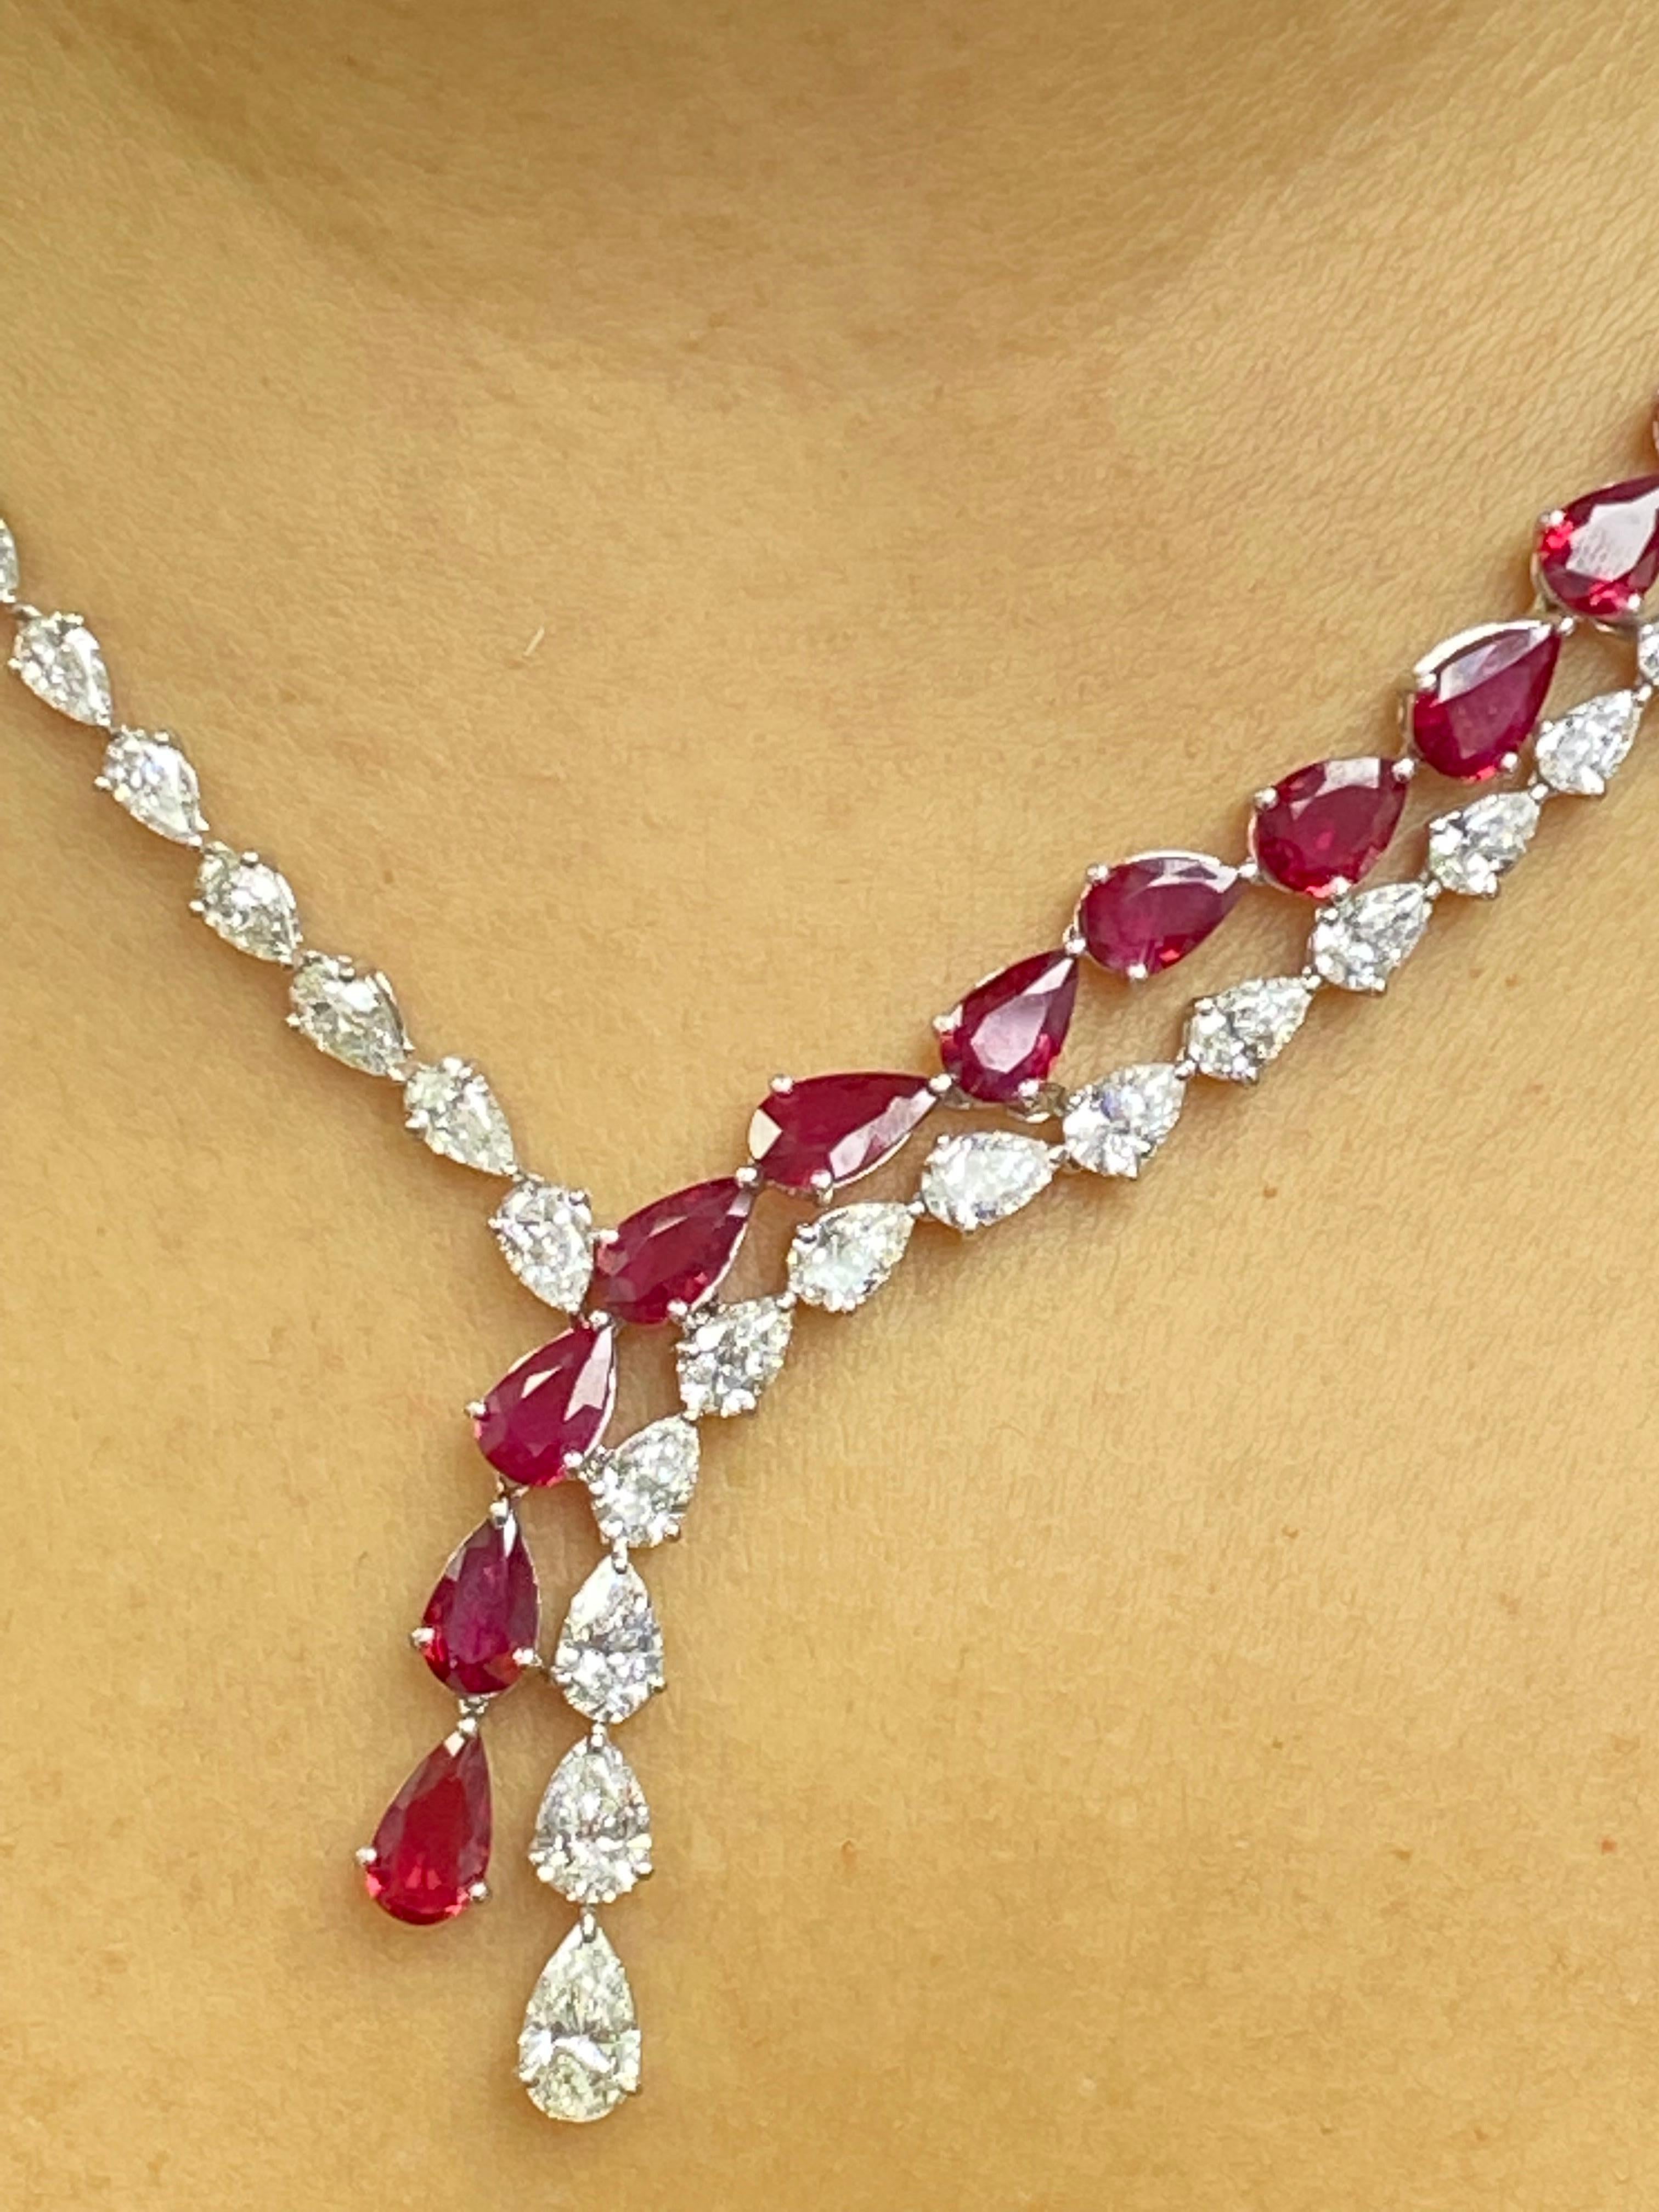 Certified 20.62 Carat Pear Shape Ruby and Diamond Drop Necklace in Platinum For Sale 1